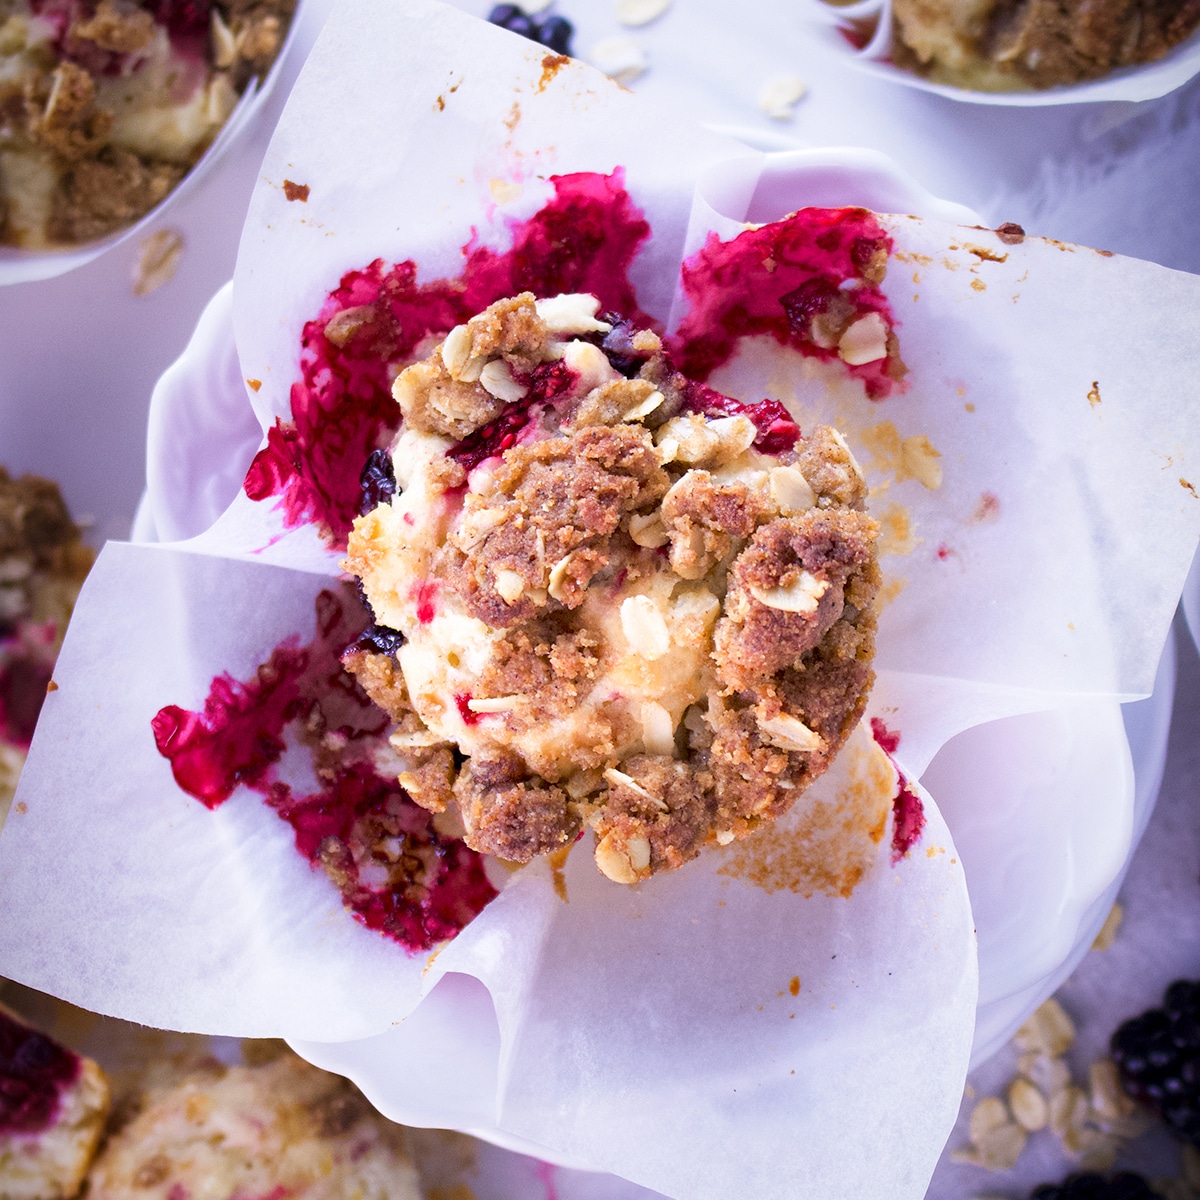 A mixed berry muffin with brown sugar and oats streusel in the center of a table covered in muffins and berries.